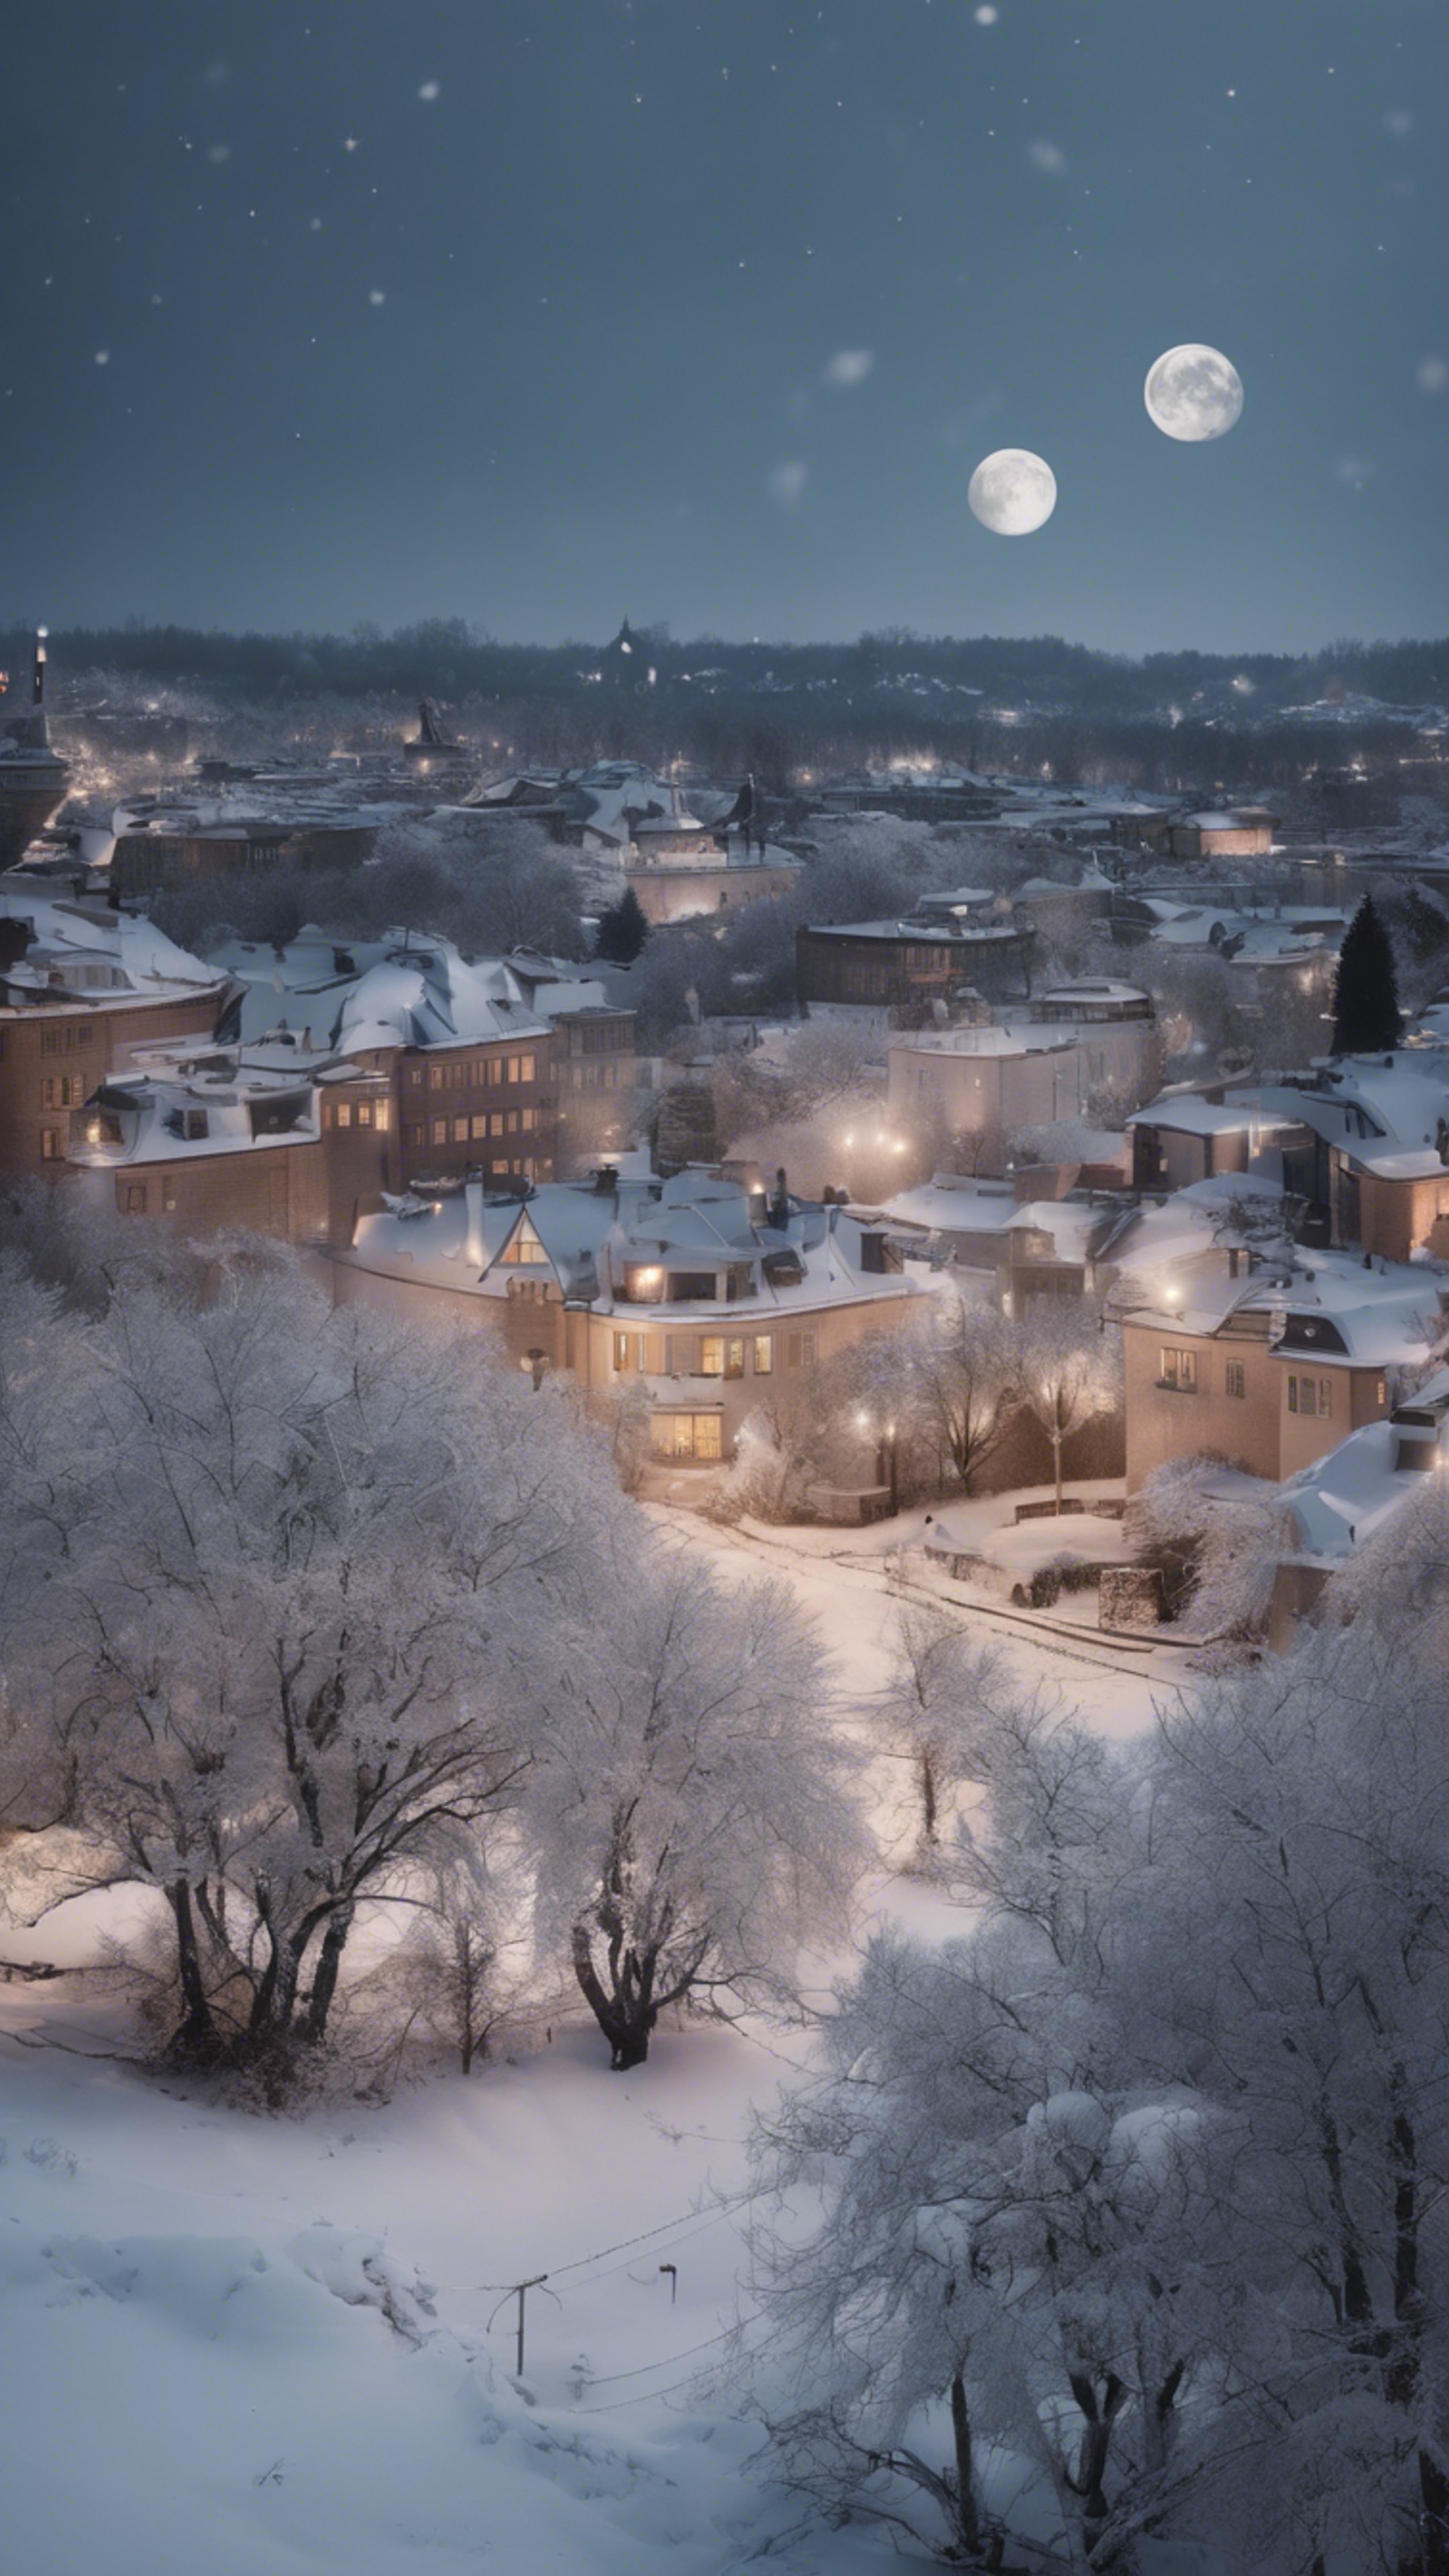 A snowy winter scene, the rooftops and trees covered by cool white snow, the moon casts a silvery glow on the serene town. Wallpaper[b59119720f8642b39e1c]